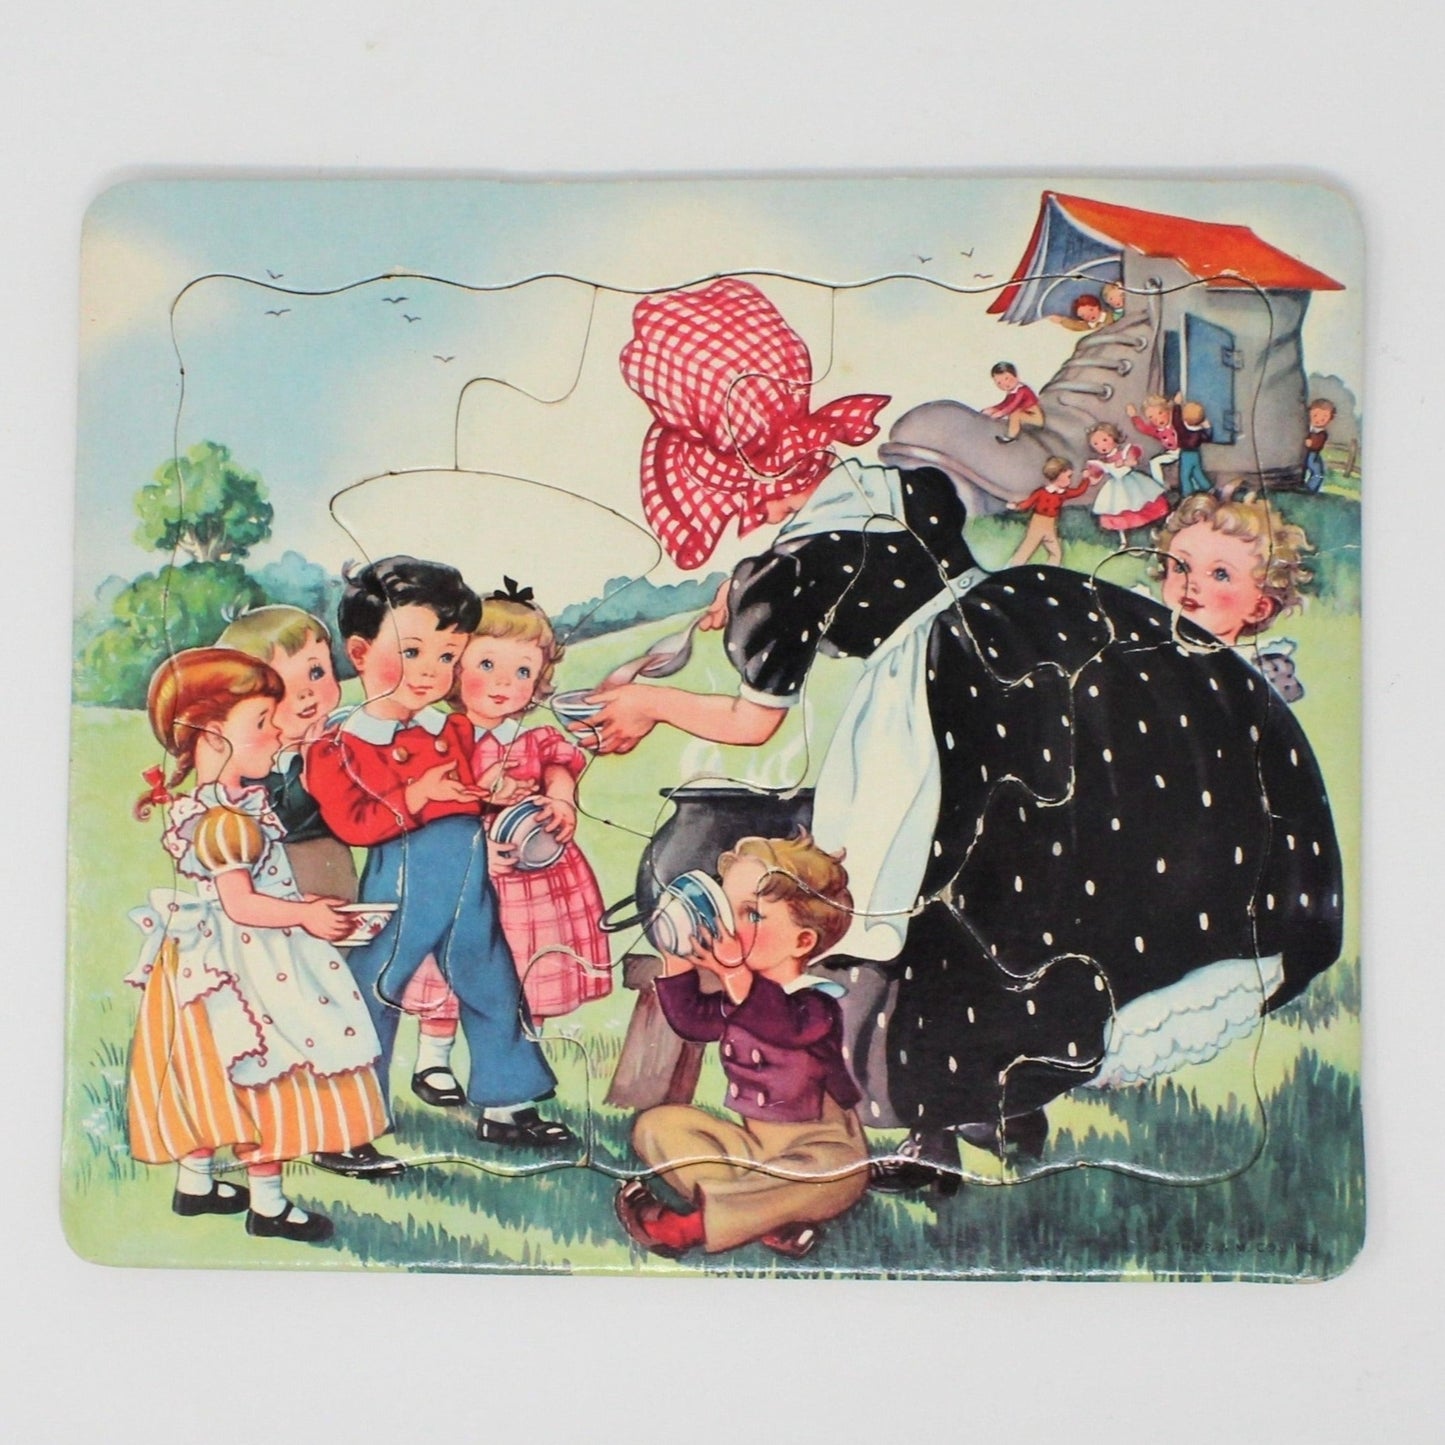 Puzzle, P & M Co, Nursery Rhyme, Old Woman who Lived in a Shoe, Vintage 1940's